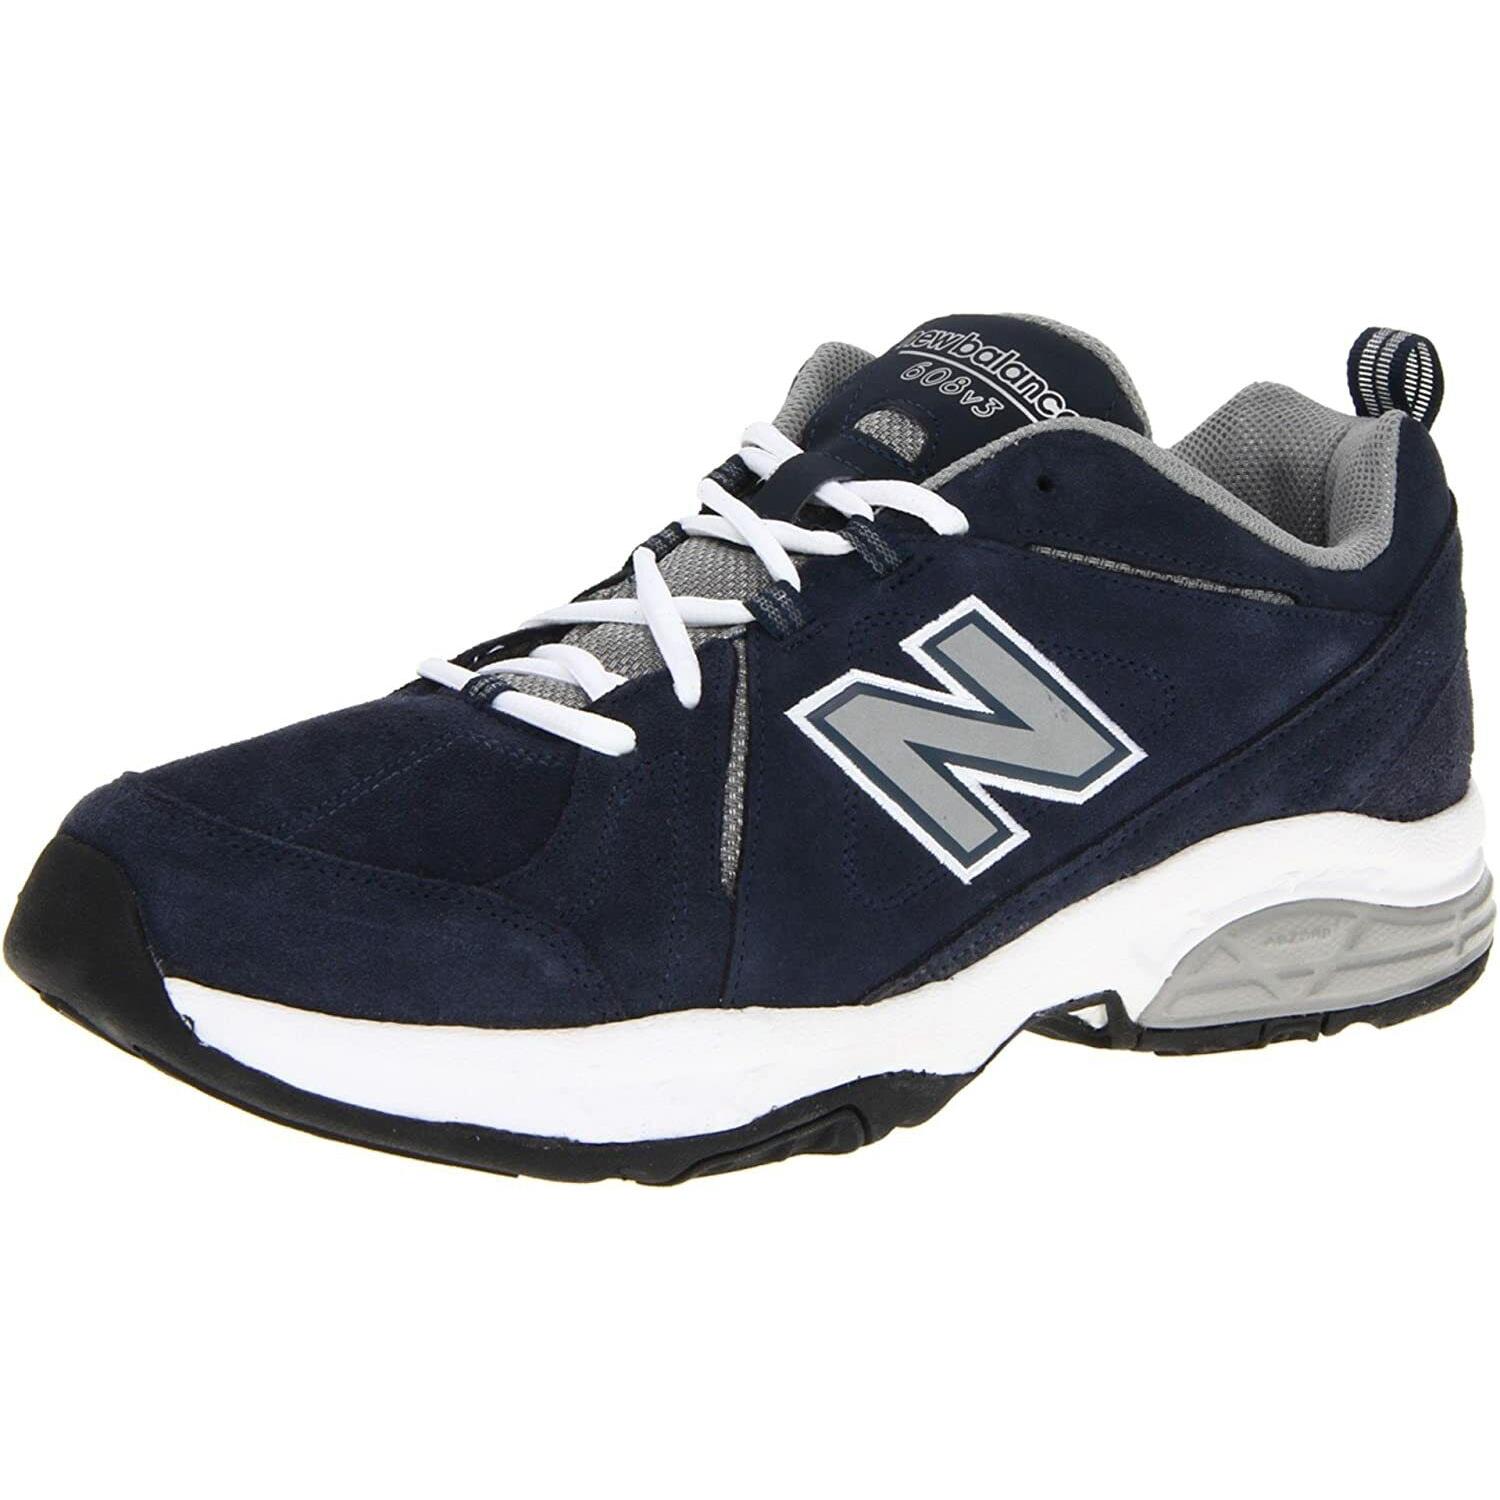 Balance 608 Navy/white Training/running Mens Sneaker Wide Shoes Size 11.5 4e